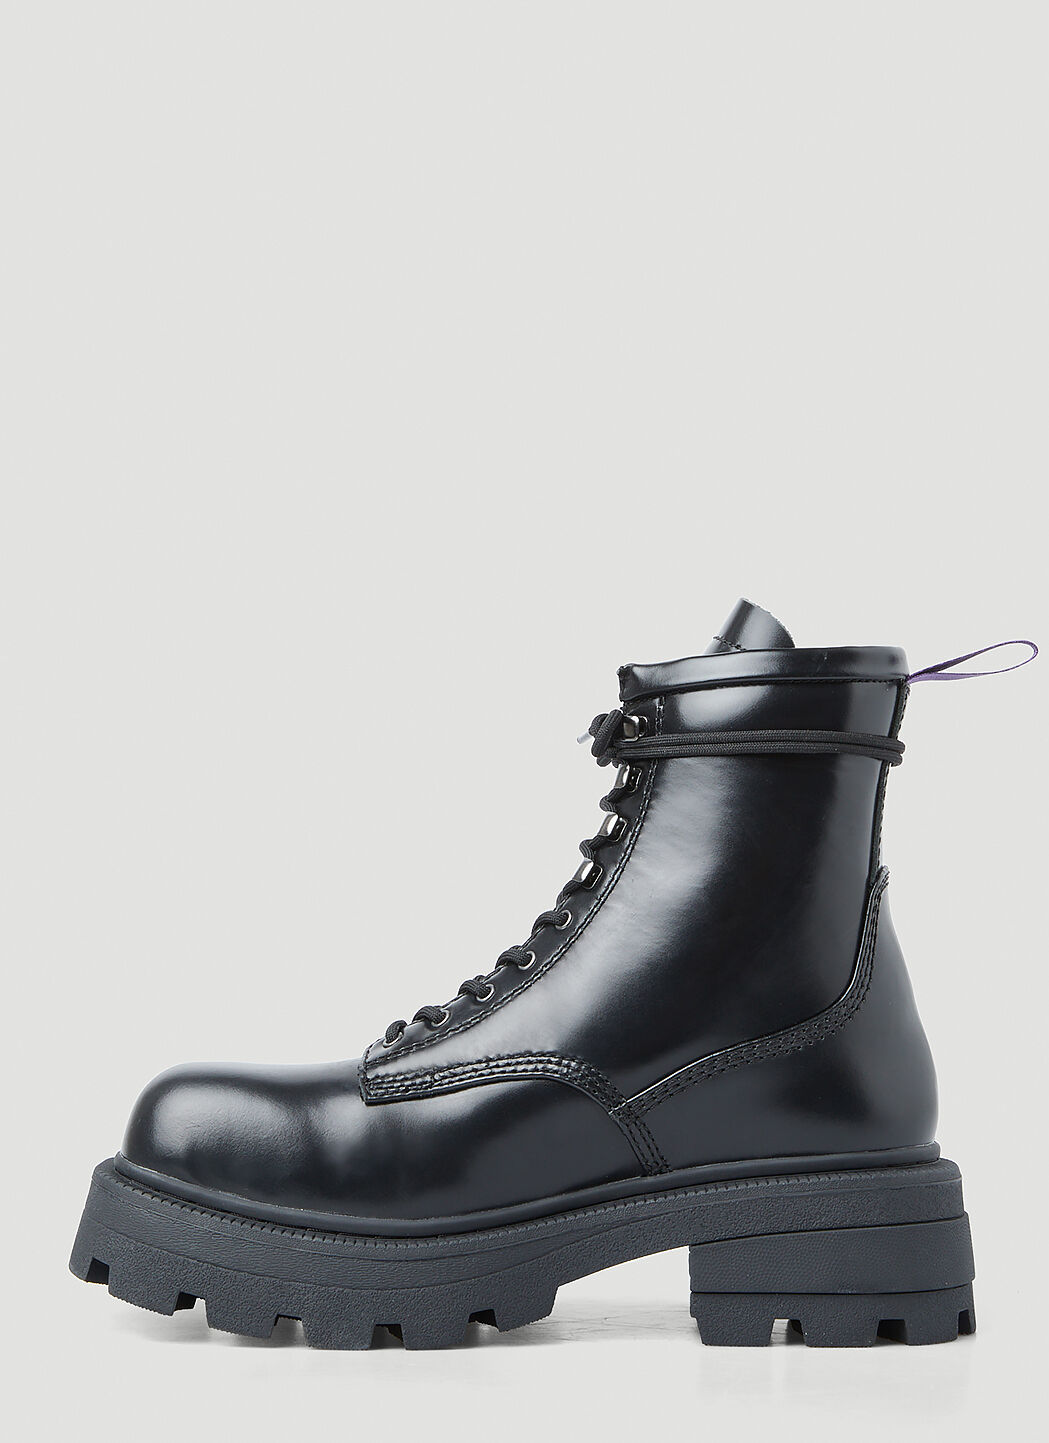 Eytys Michigan Lace Up Boots in Black | LN-CC®